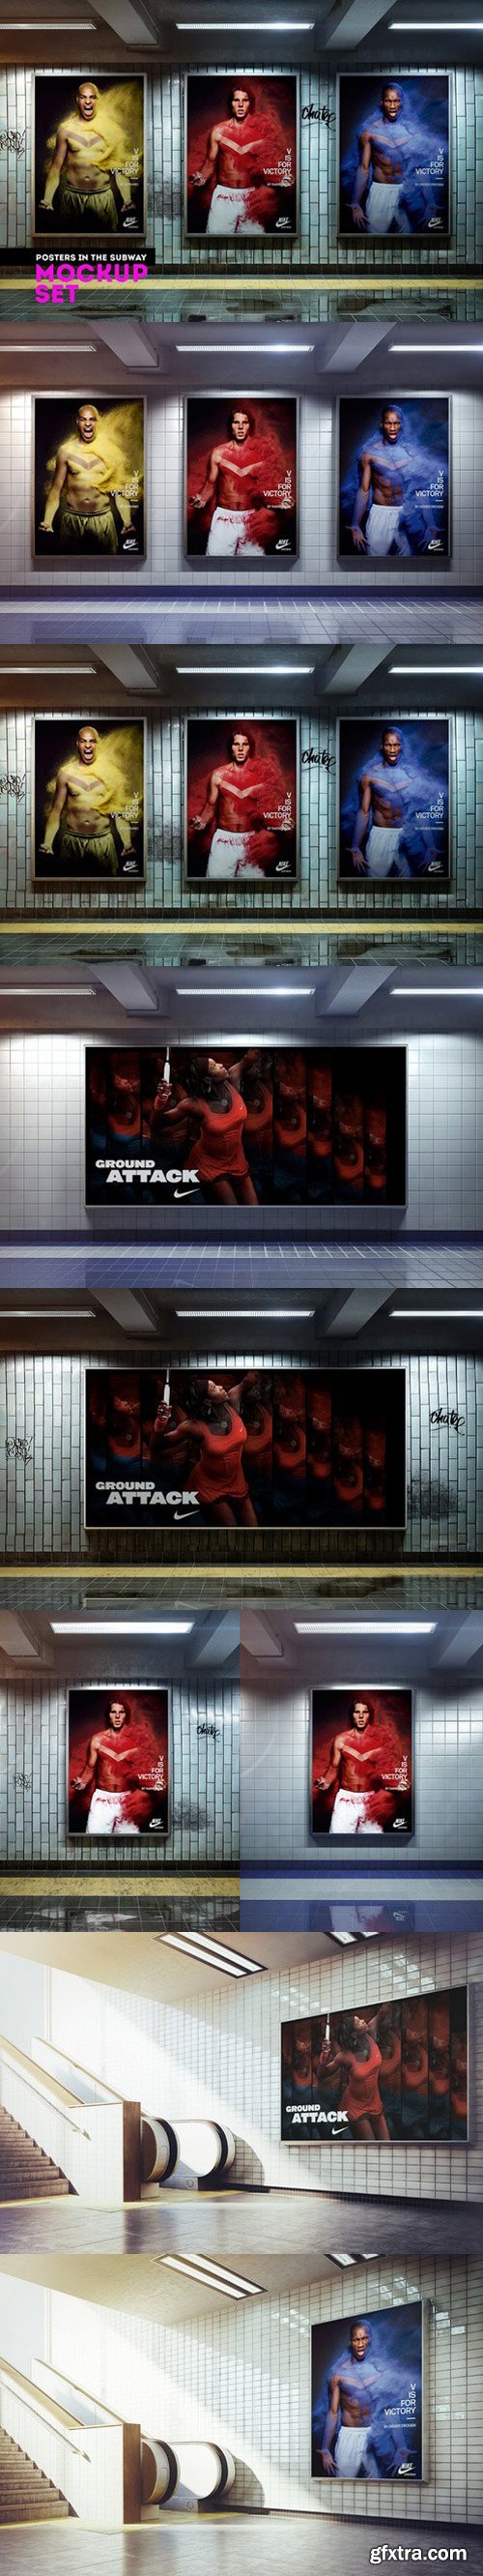 CM - Posters in the subway Mockup Set 642245